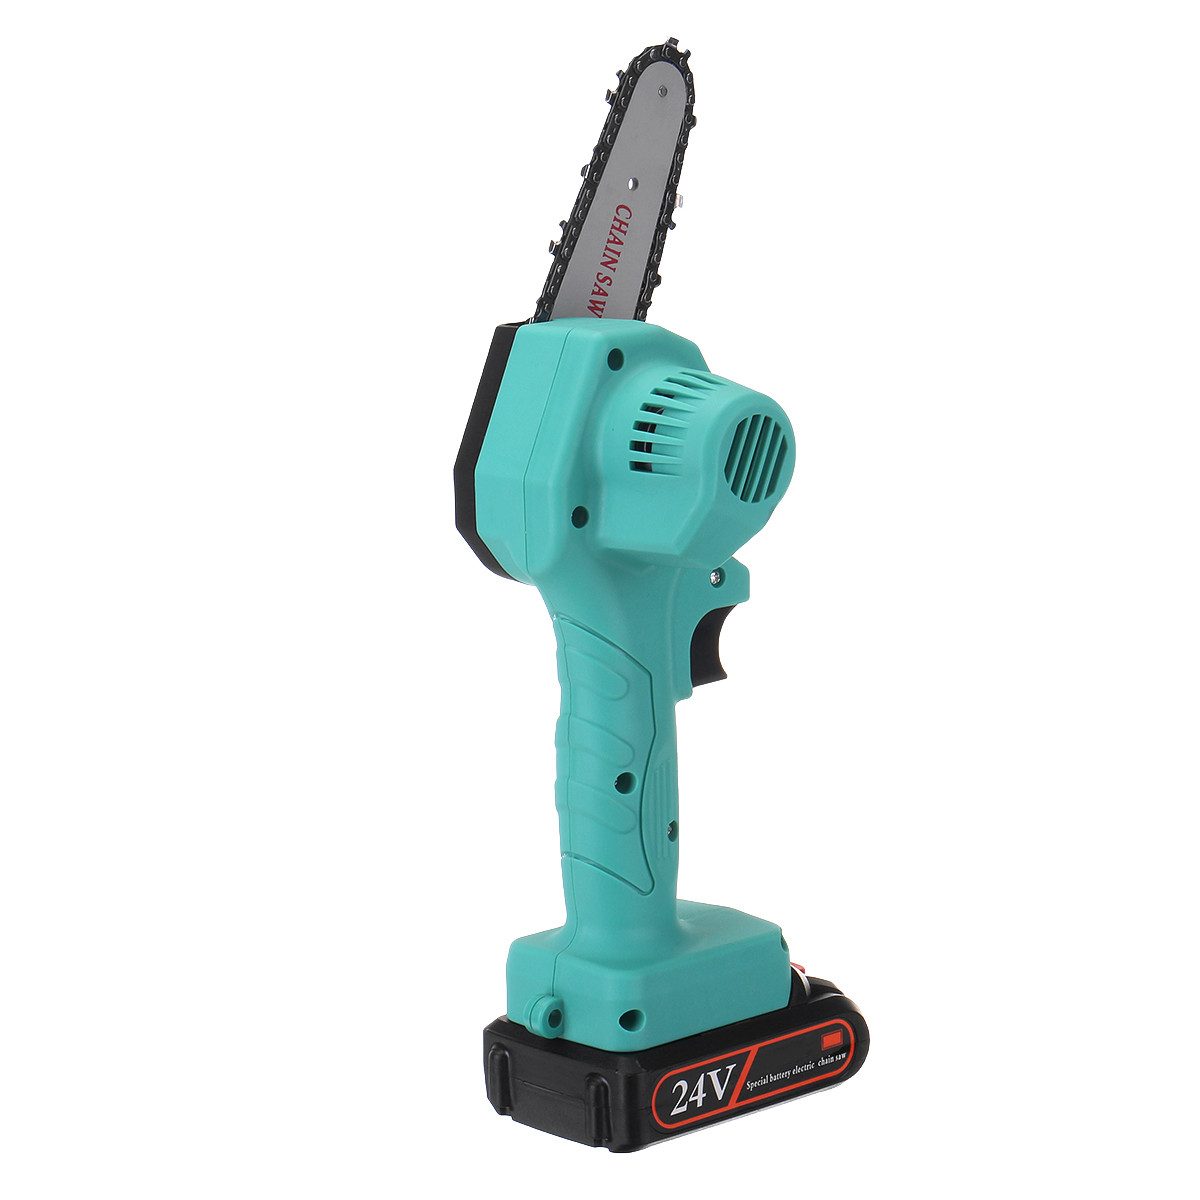 21V-Rechargeable-Portable-Electric-Saws-Household-Woodworking-Chainsaw-Garden-Mini-Electric-Chain-Sa-1764820-4